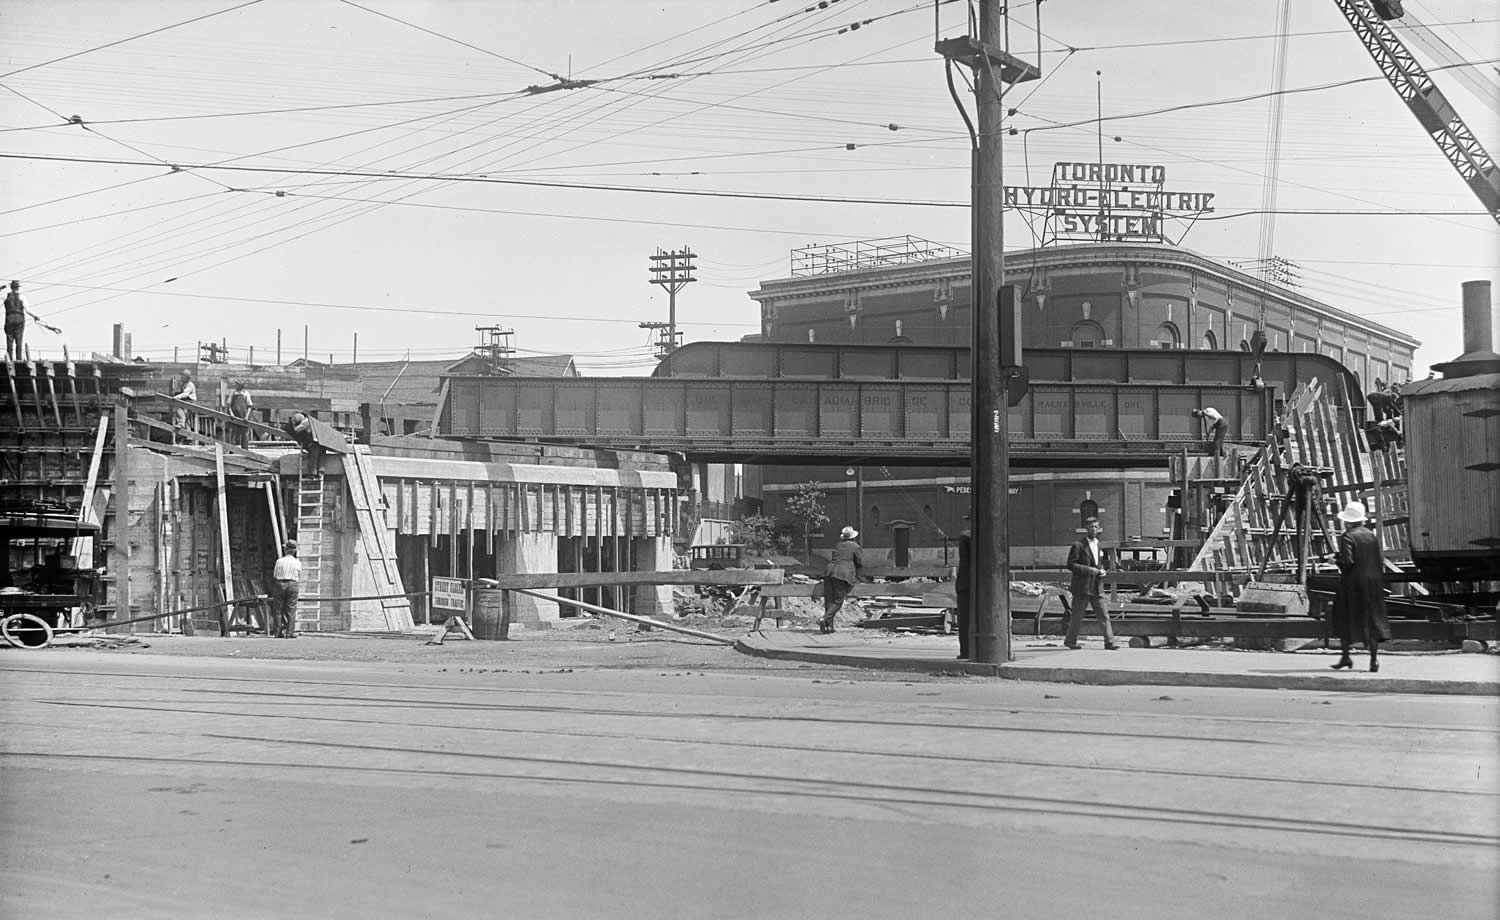 Black and white image of Carlaw Avenue from Gerrard Street East. Workers are building a rail bridge and a Toronto Hydro-Electric System substation is in the background.